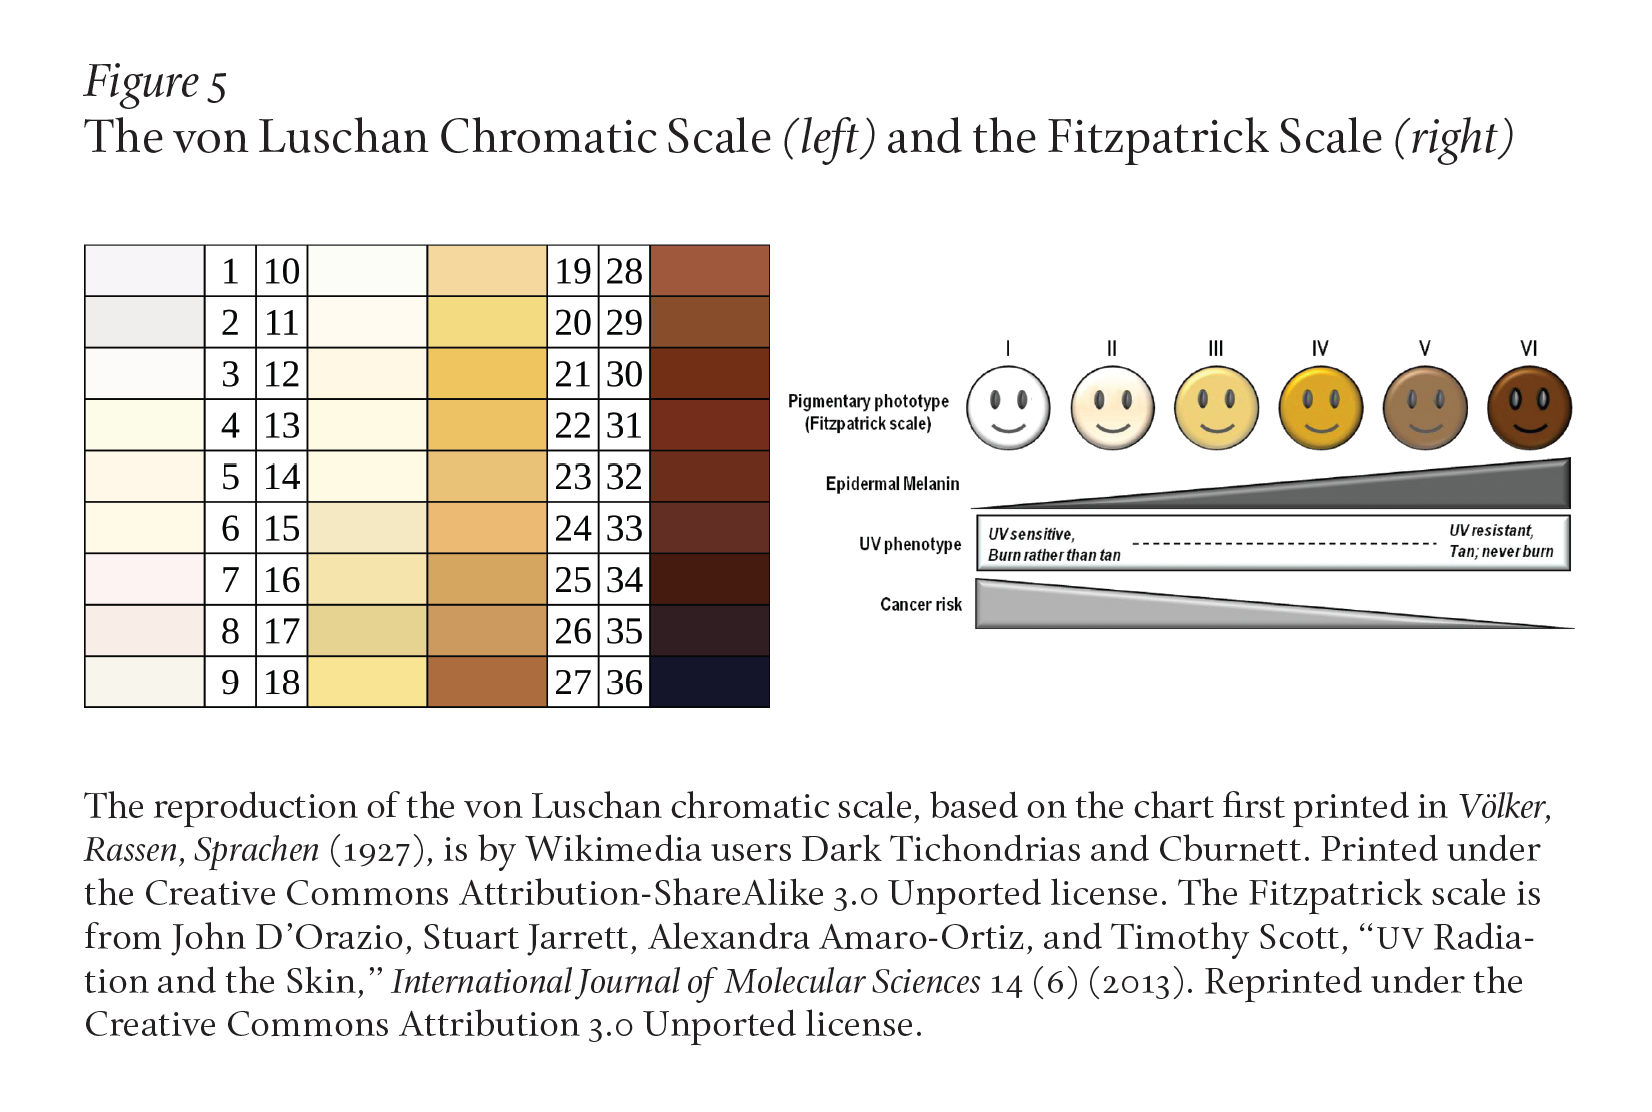 The von Luschan Chromatic Scale (left) and the Fitzpatrick Scale (right)